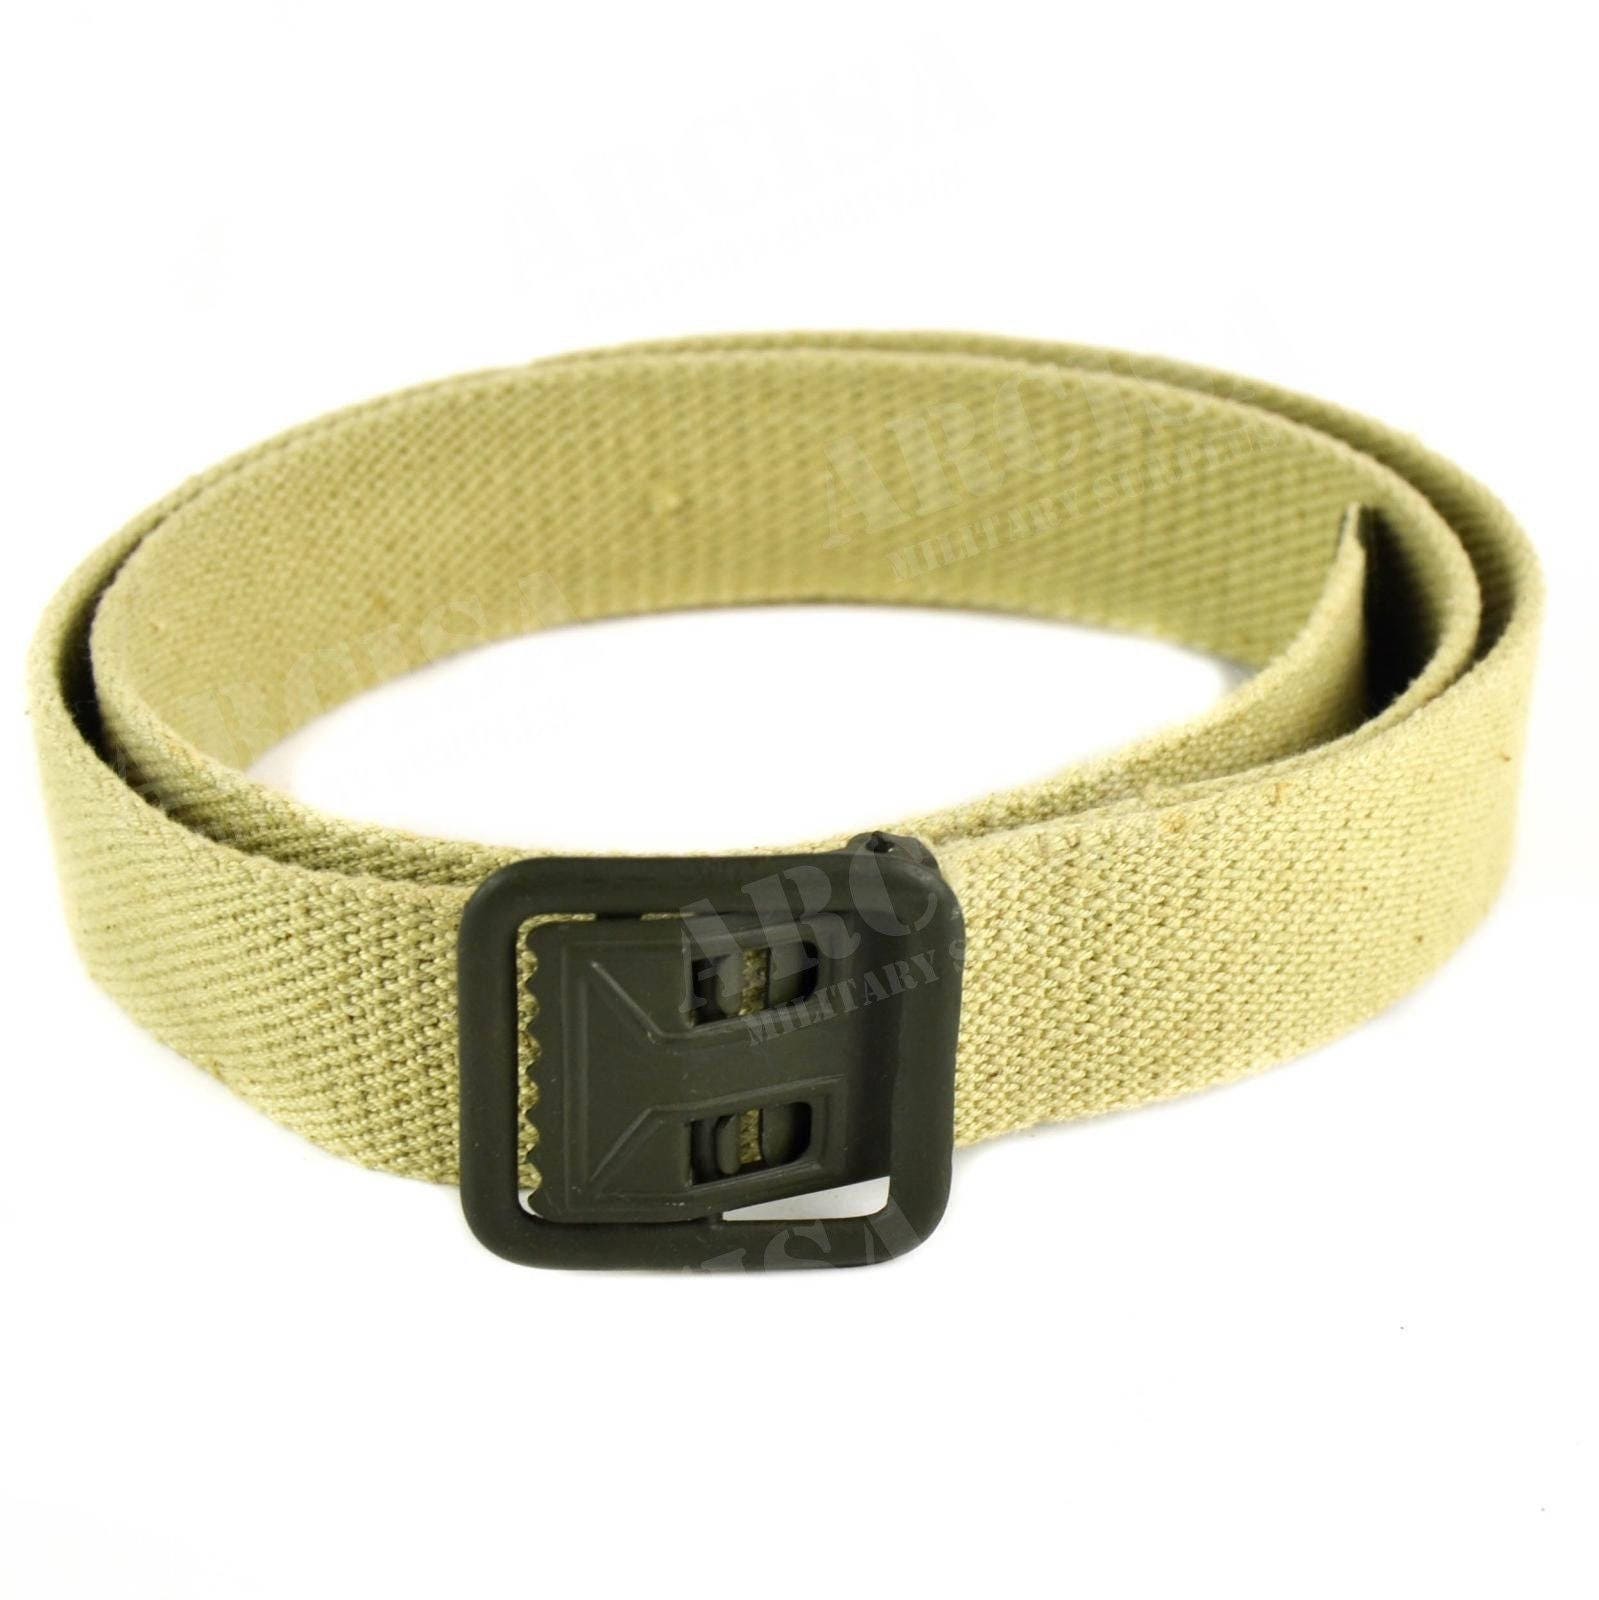 Genuine French Army Military Canvas Belt Webbing Army Trousers - Etsy